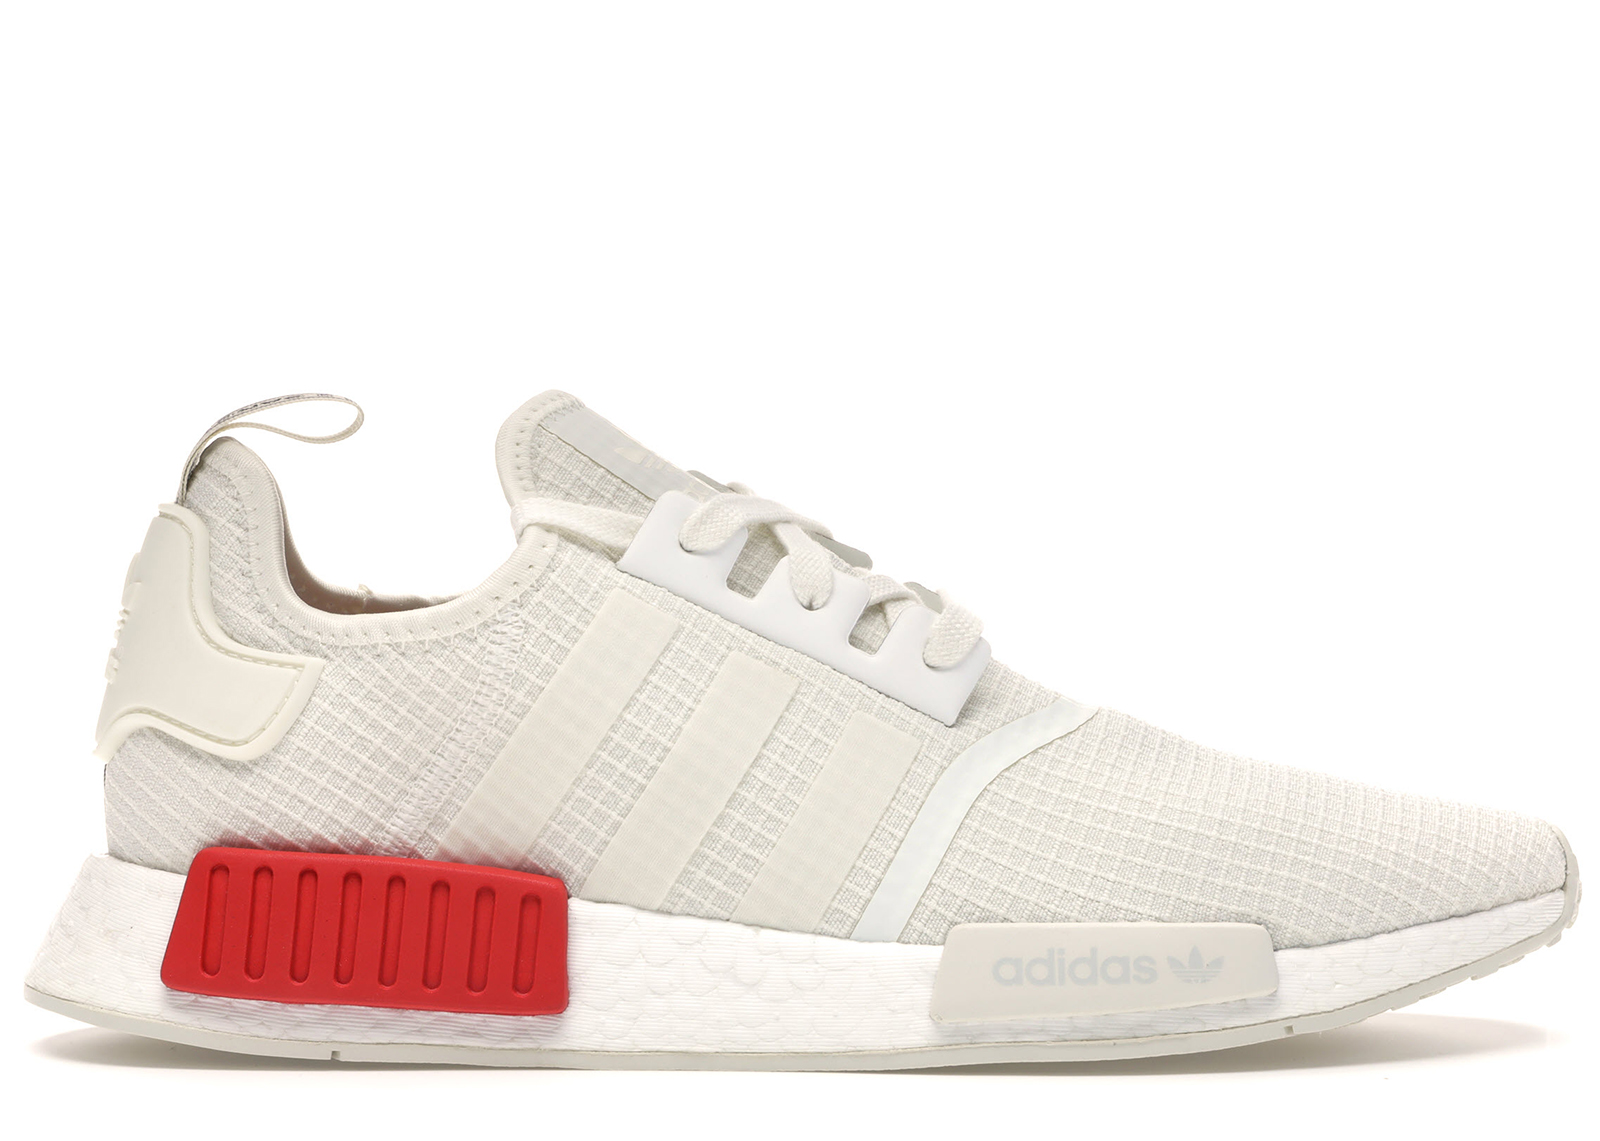 nmd r1 off white red